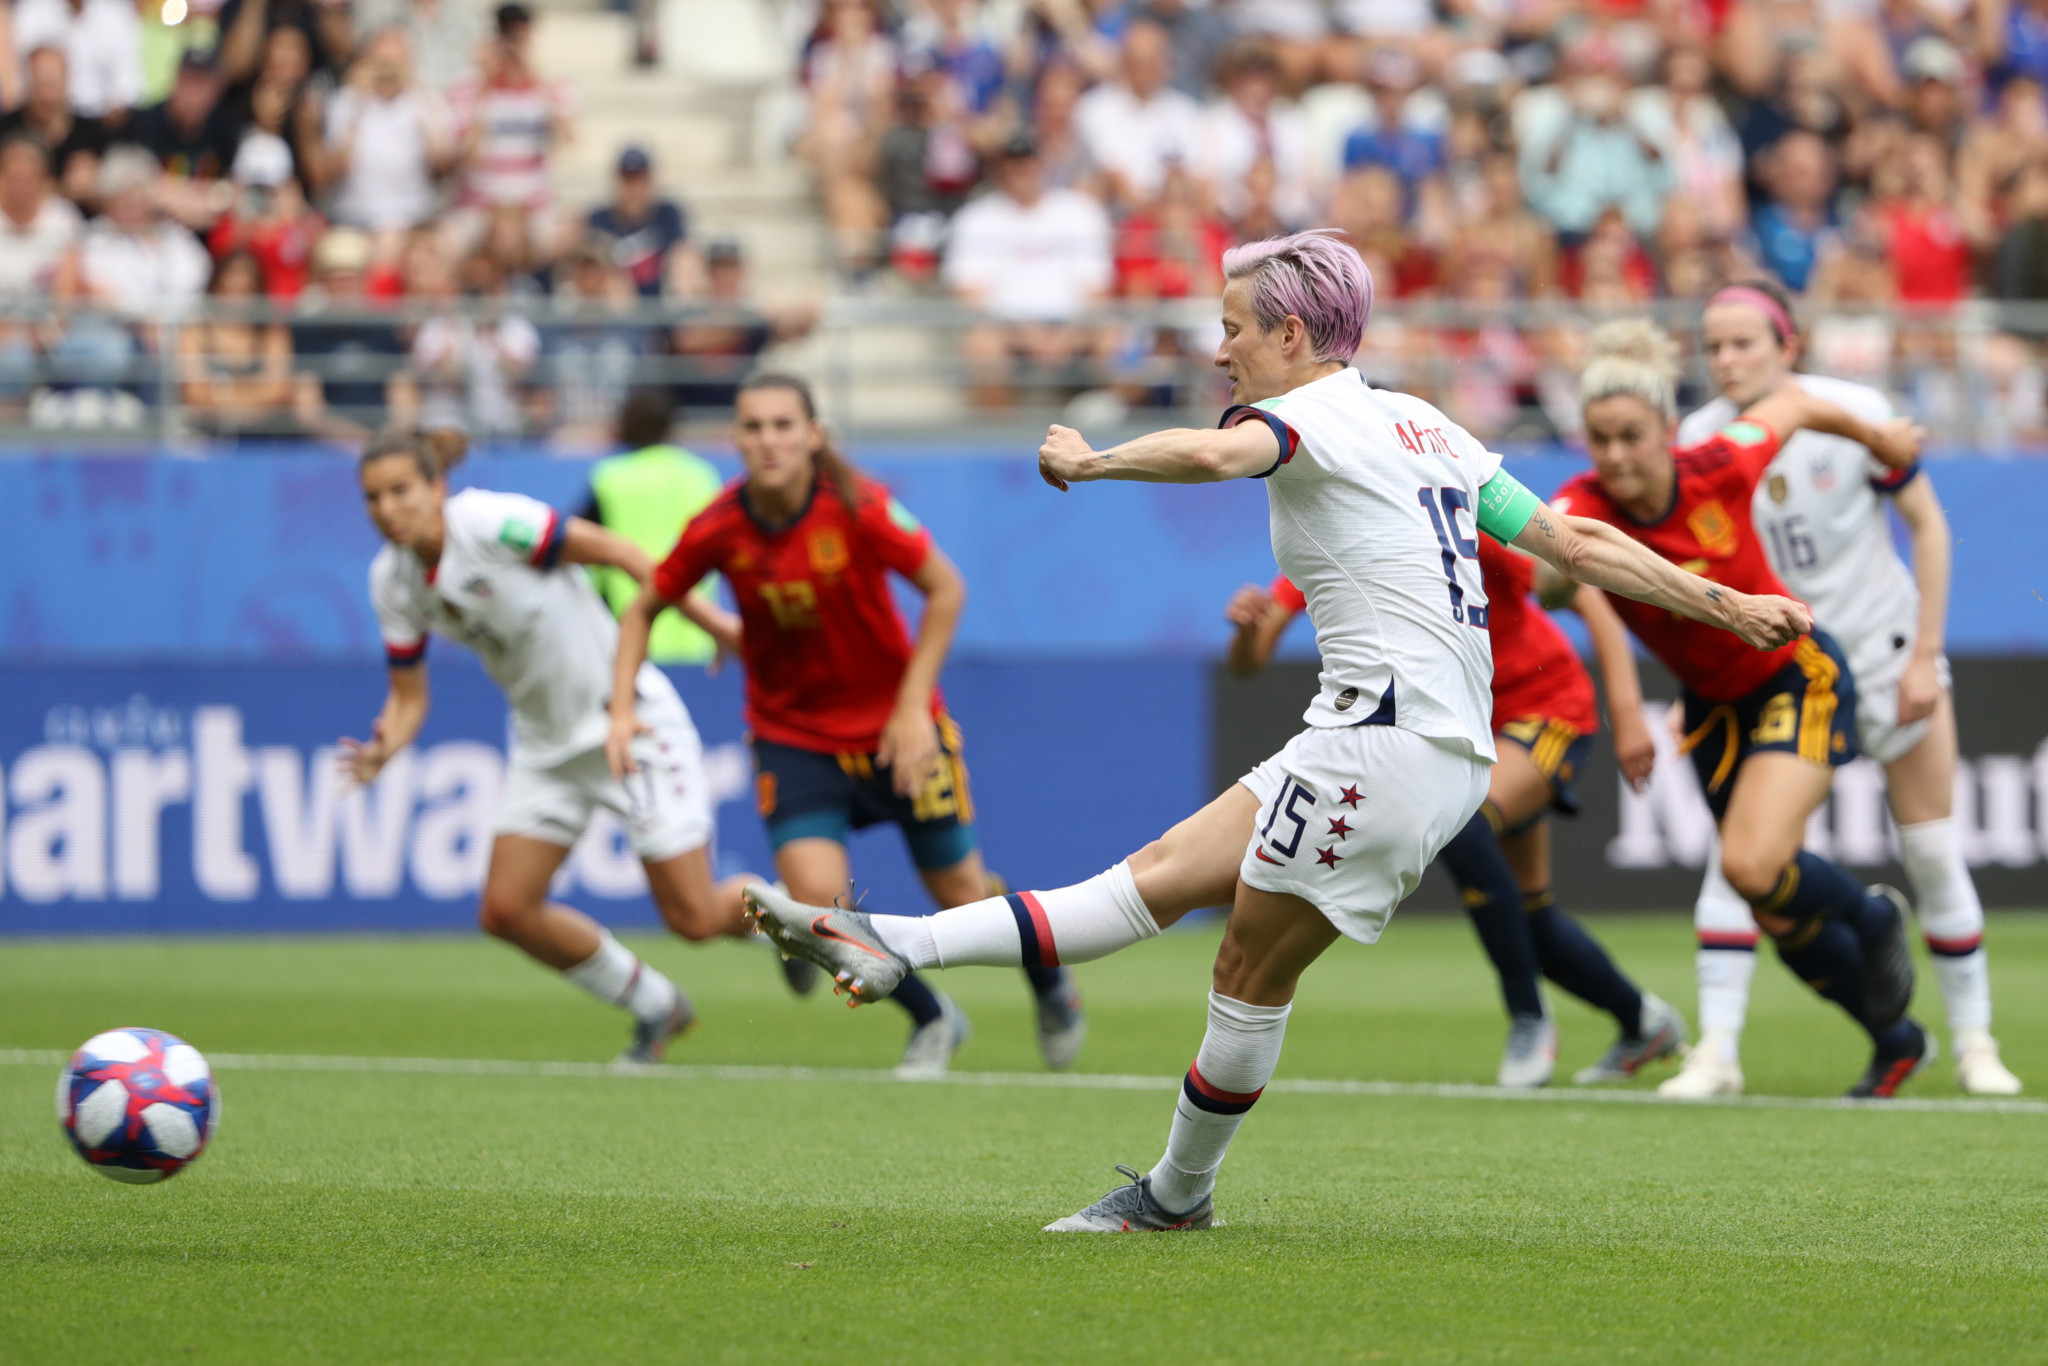 Rapinoe put the US into the lead in the seventh minute ©Getty Images